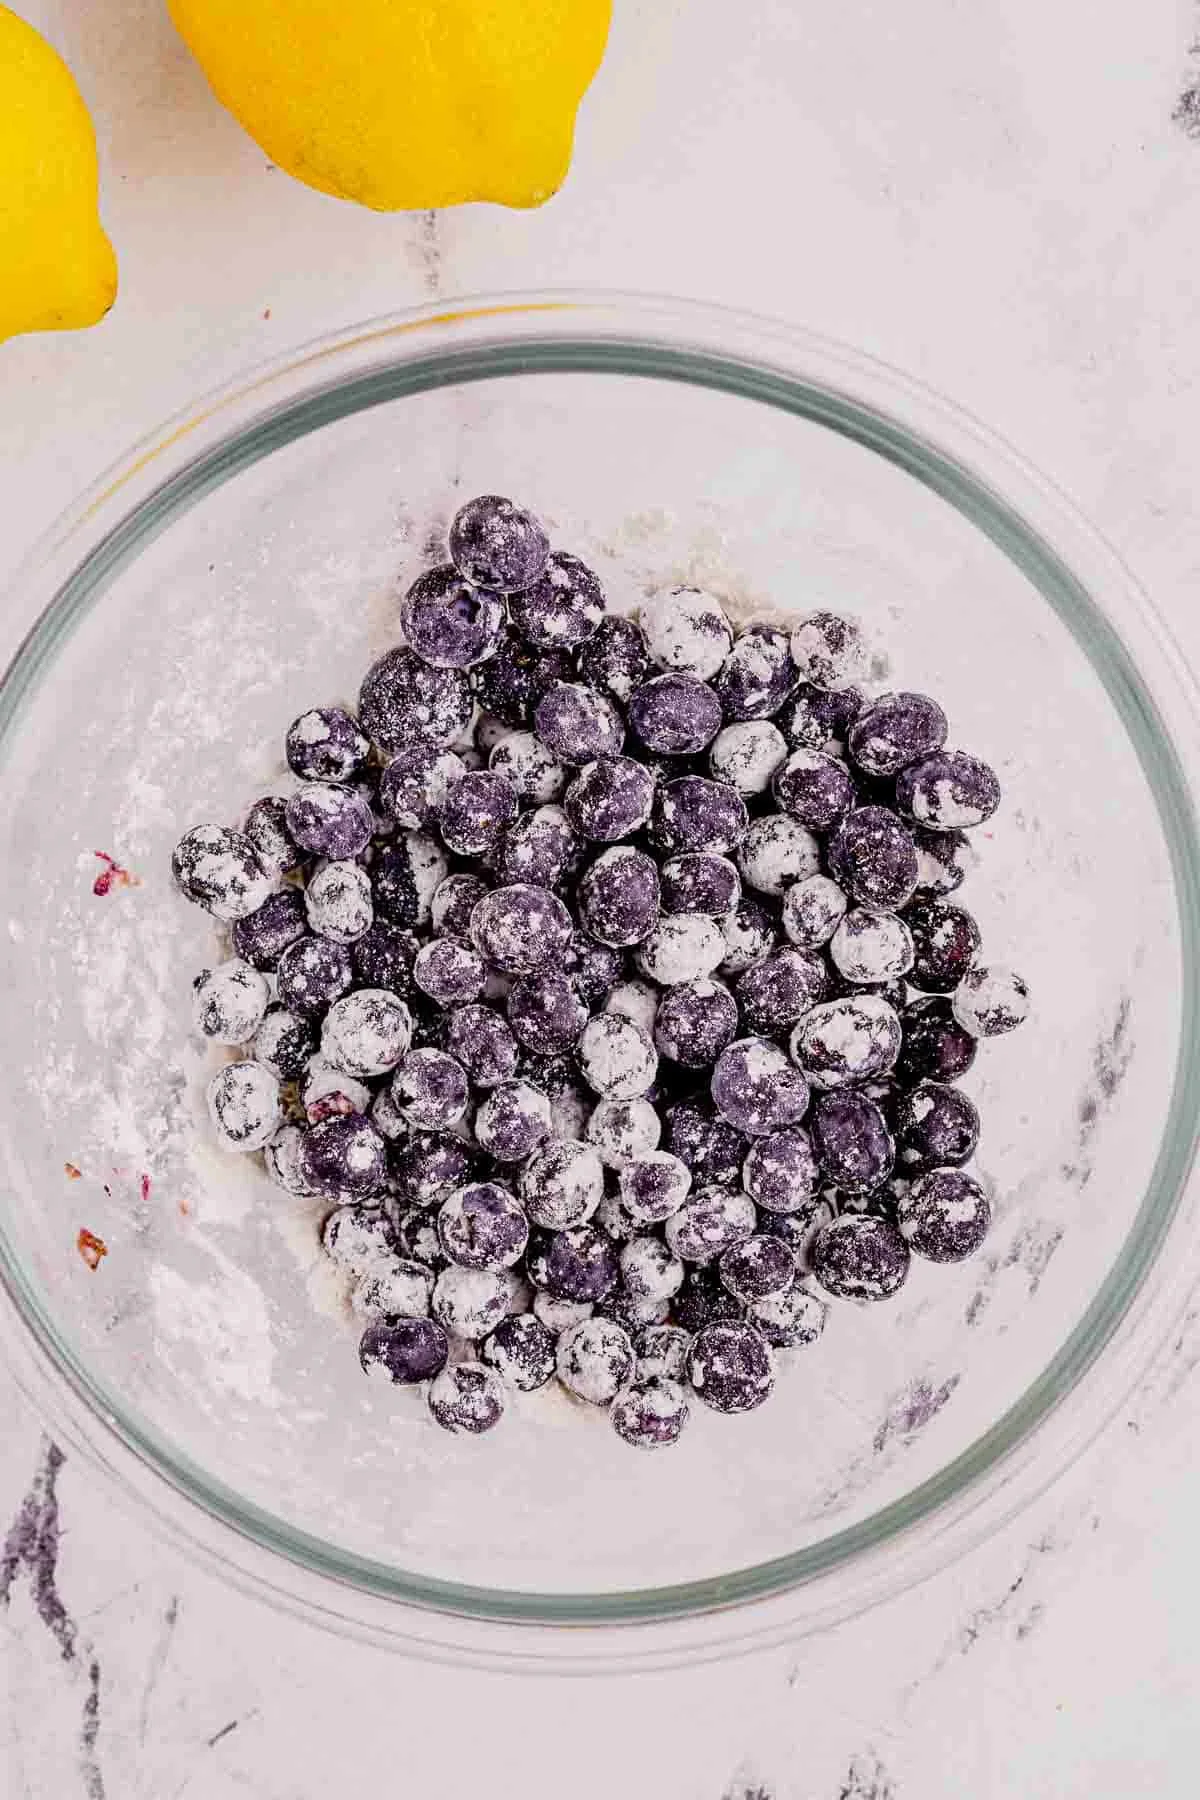 flour coated blueberries in a bowl